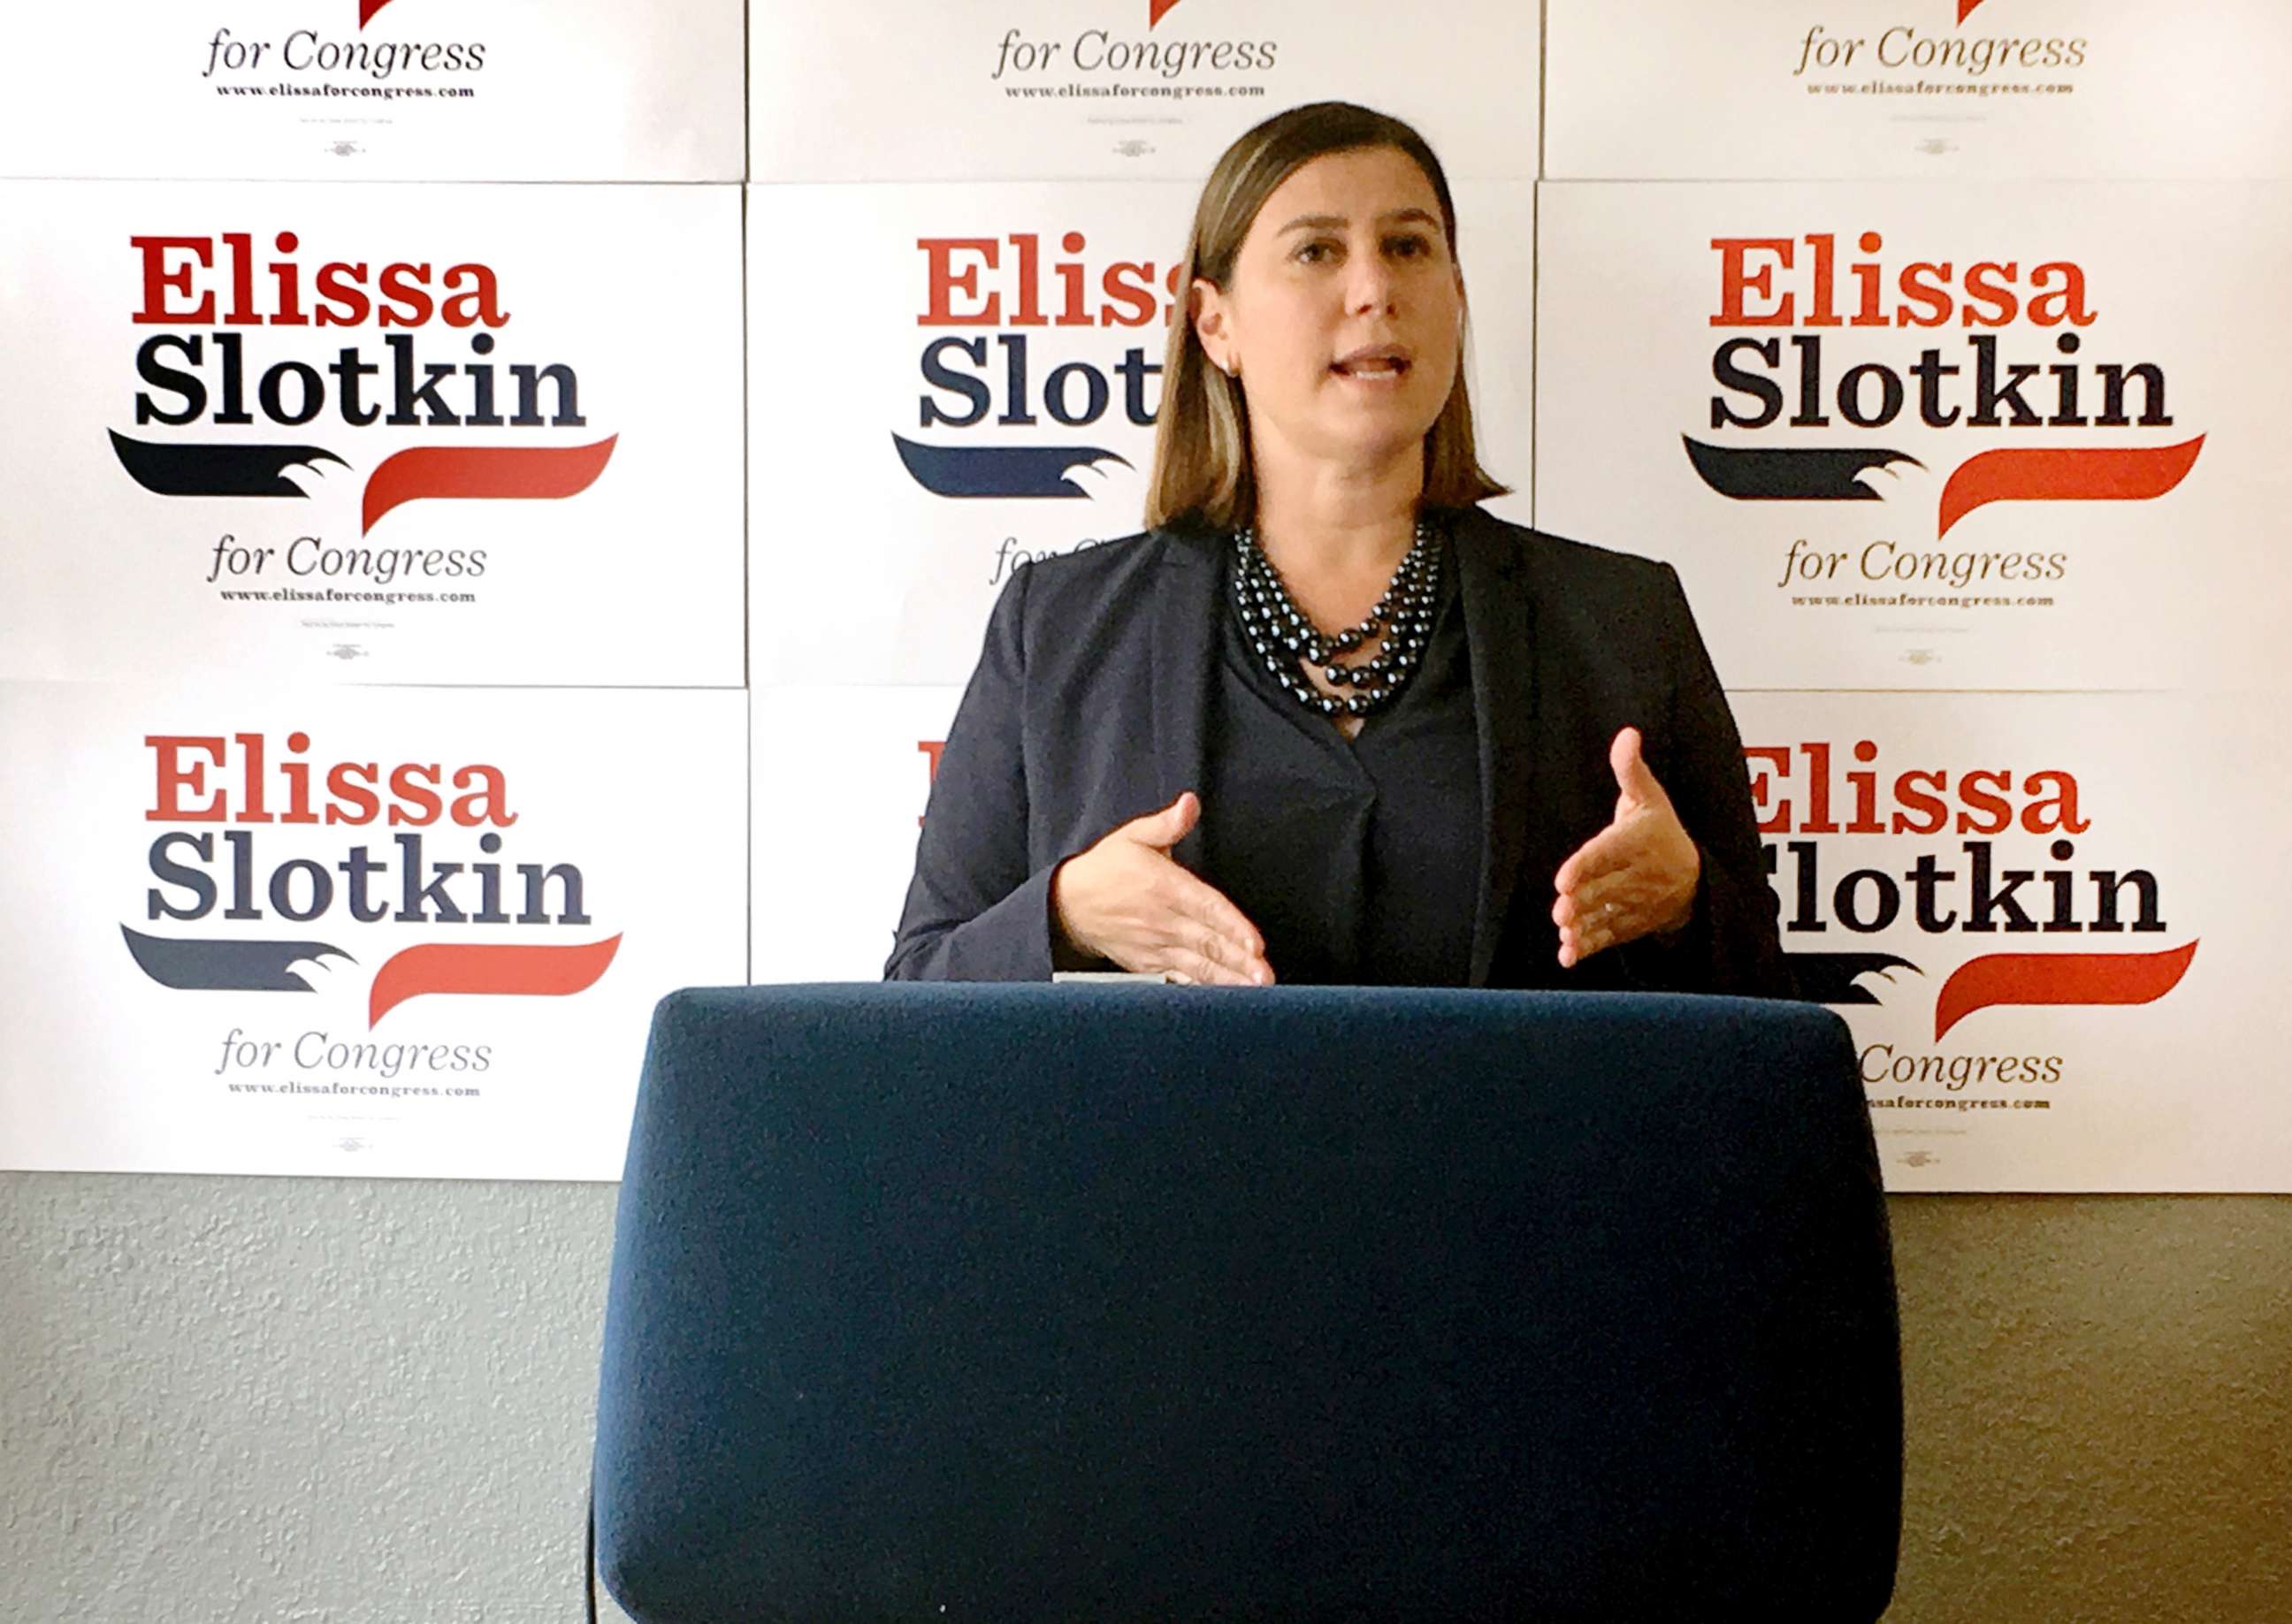 PHOTO: Elissa Slotkin, a Democratic candidate for Congress from Michigan, speaks during a news conference at her campaign headquarters in Lansing, Mich., July 31, 2018.